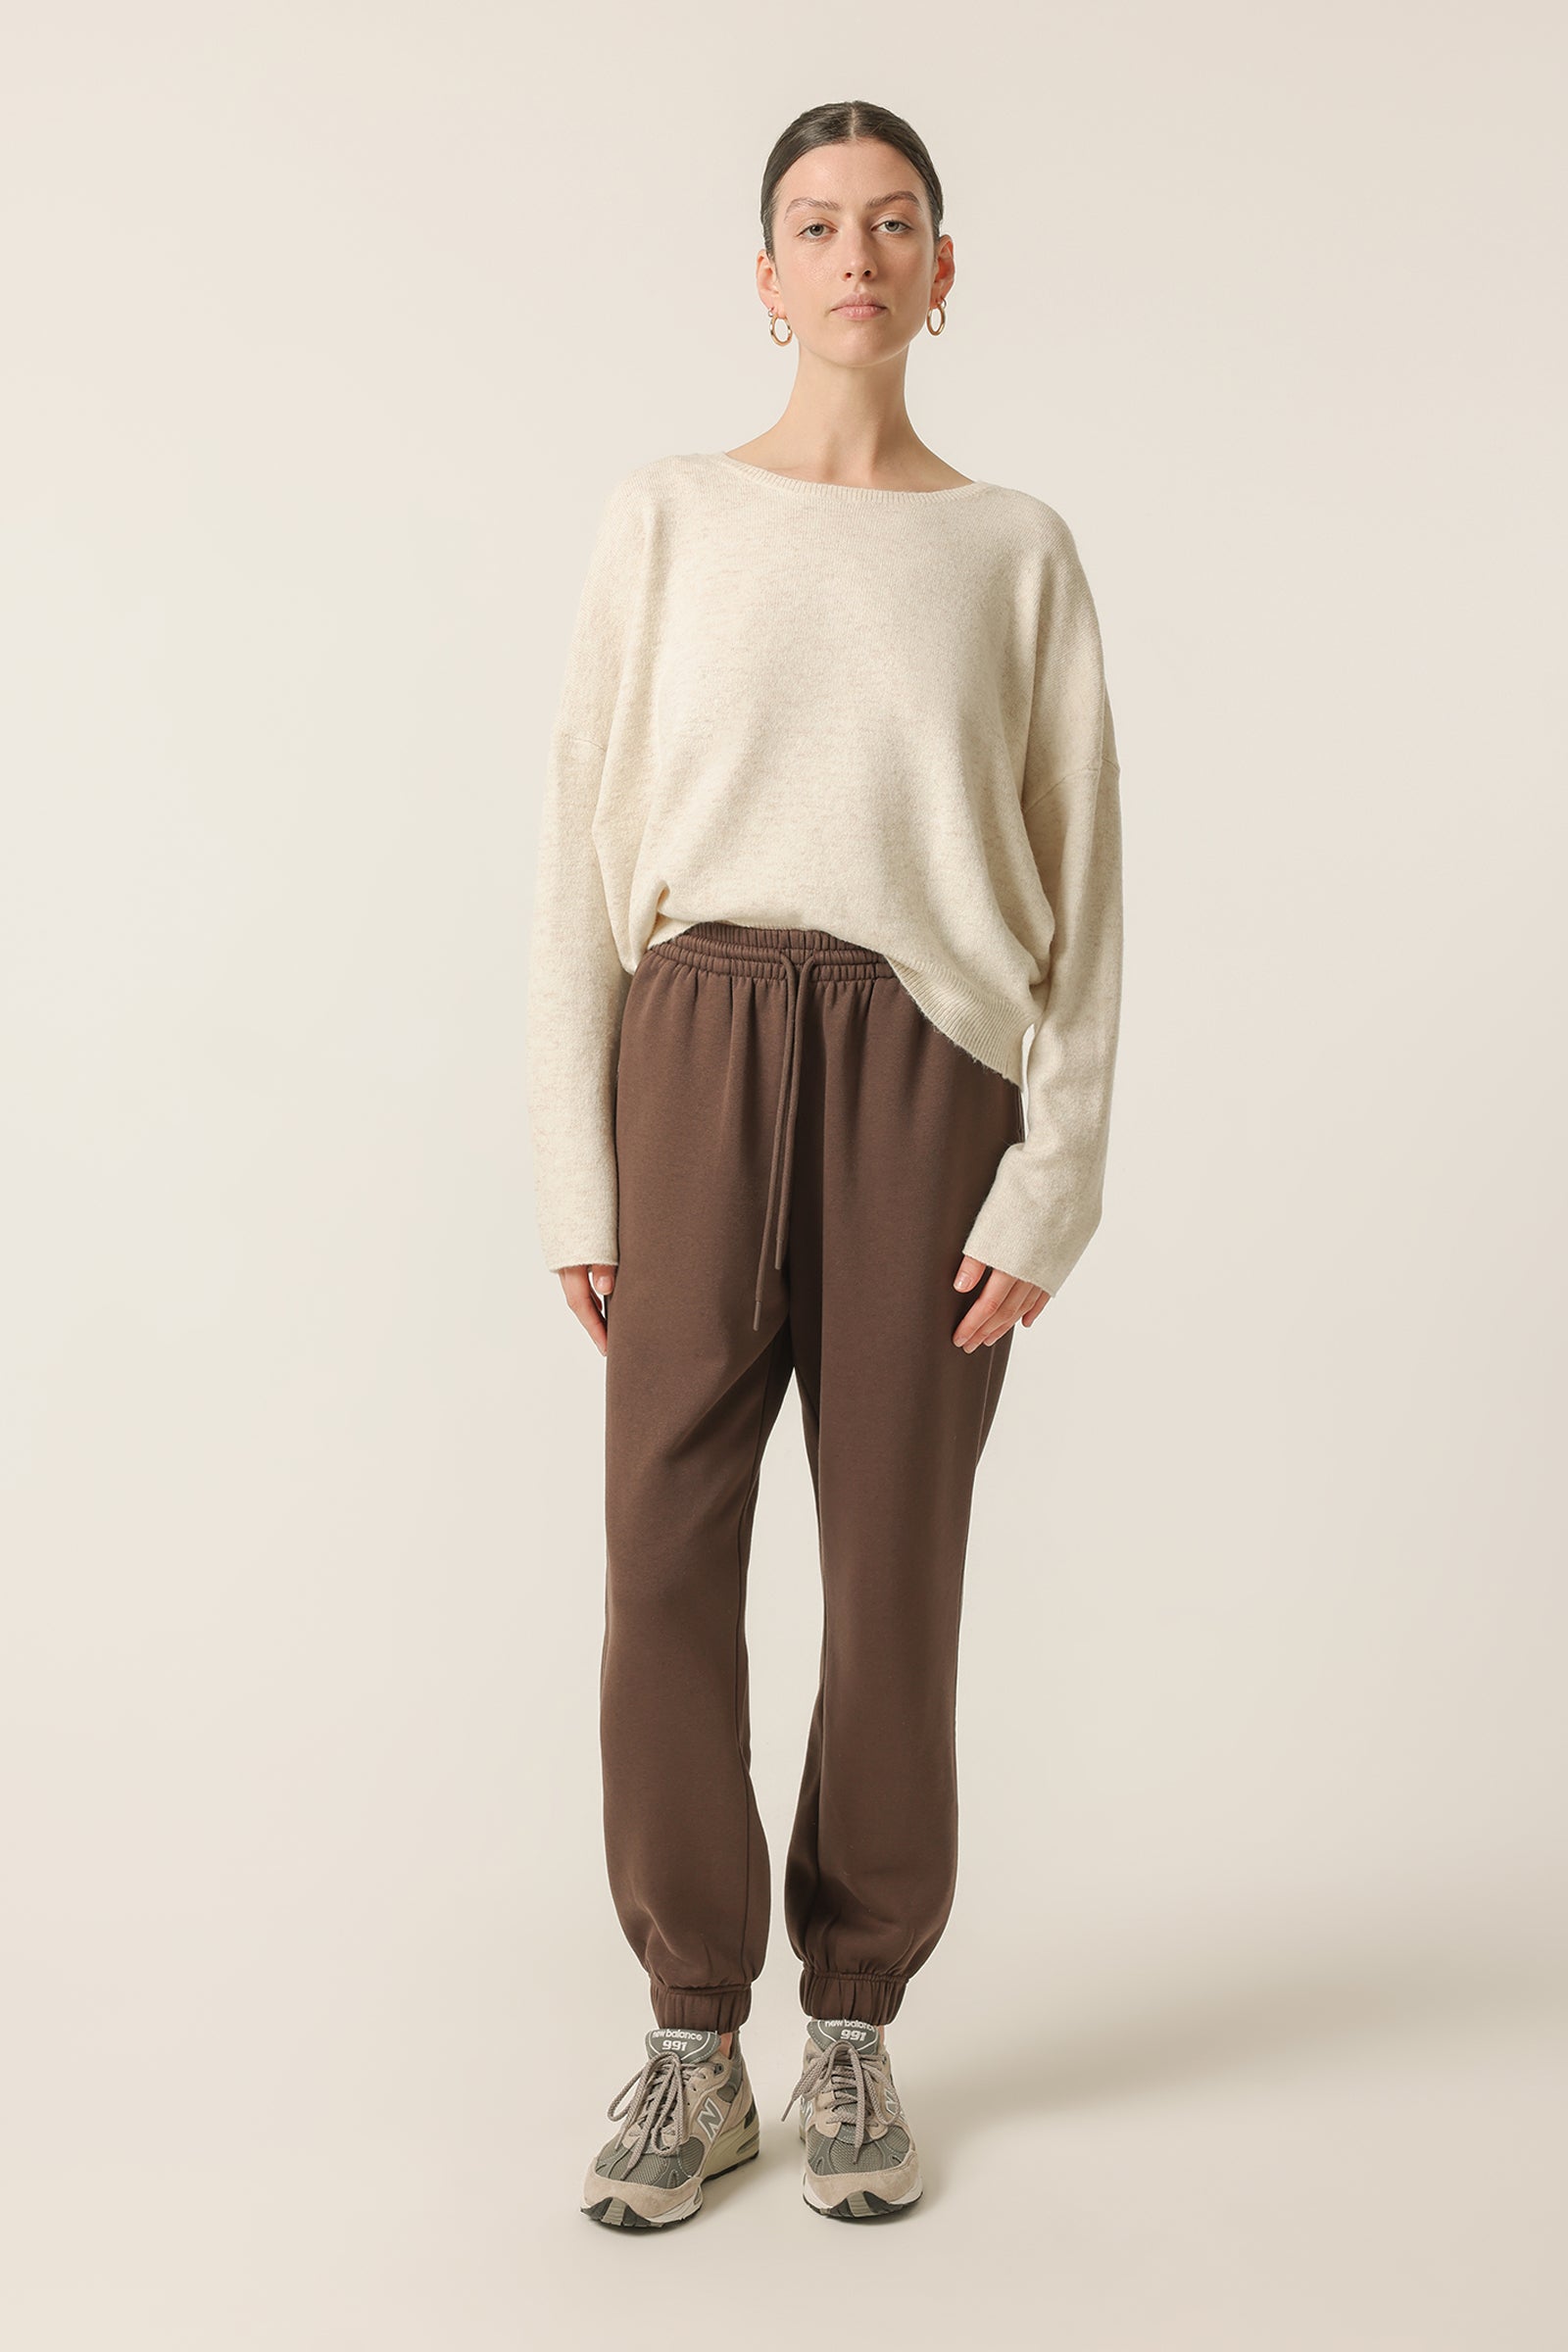 Nude Lucy Easton Knit in White Cloud